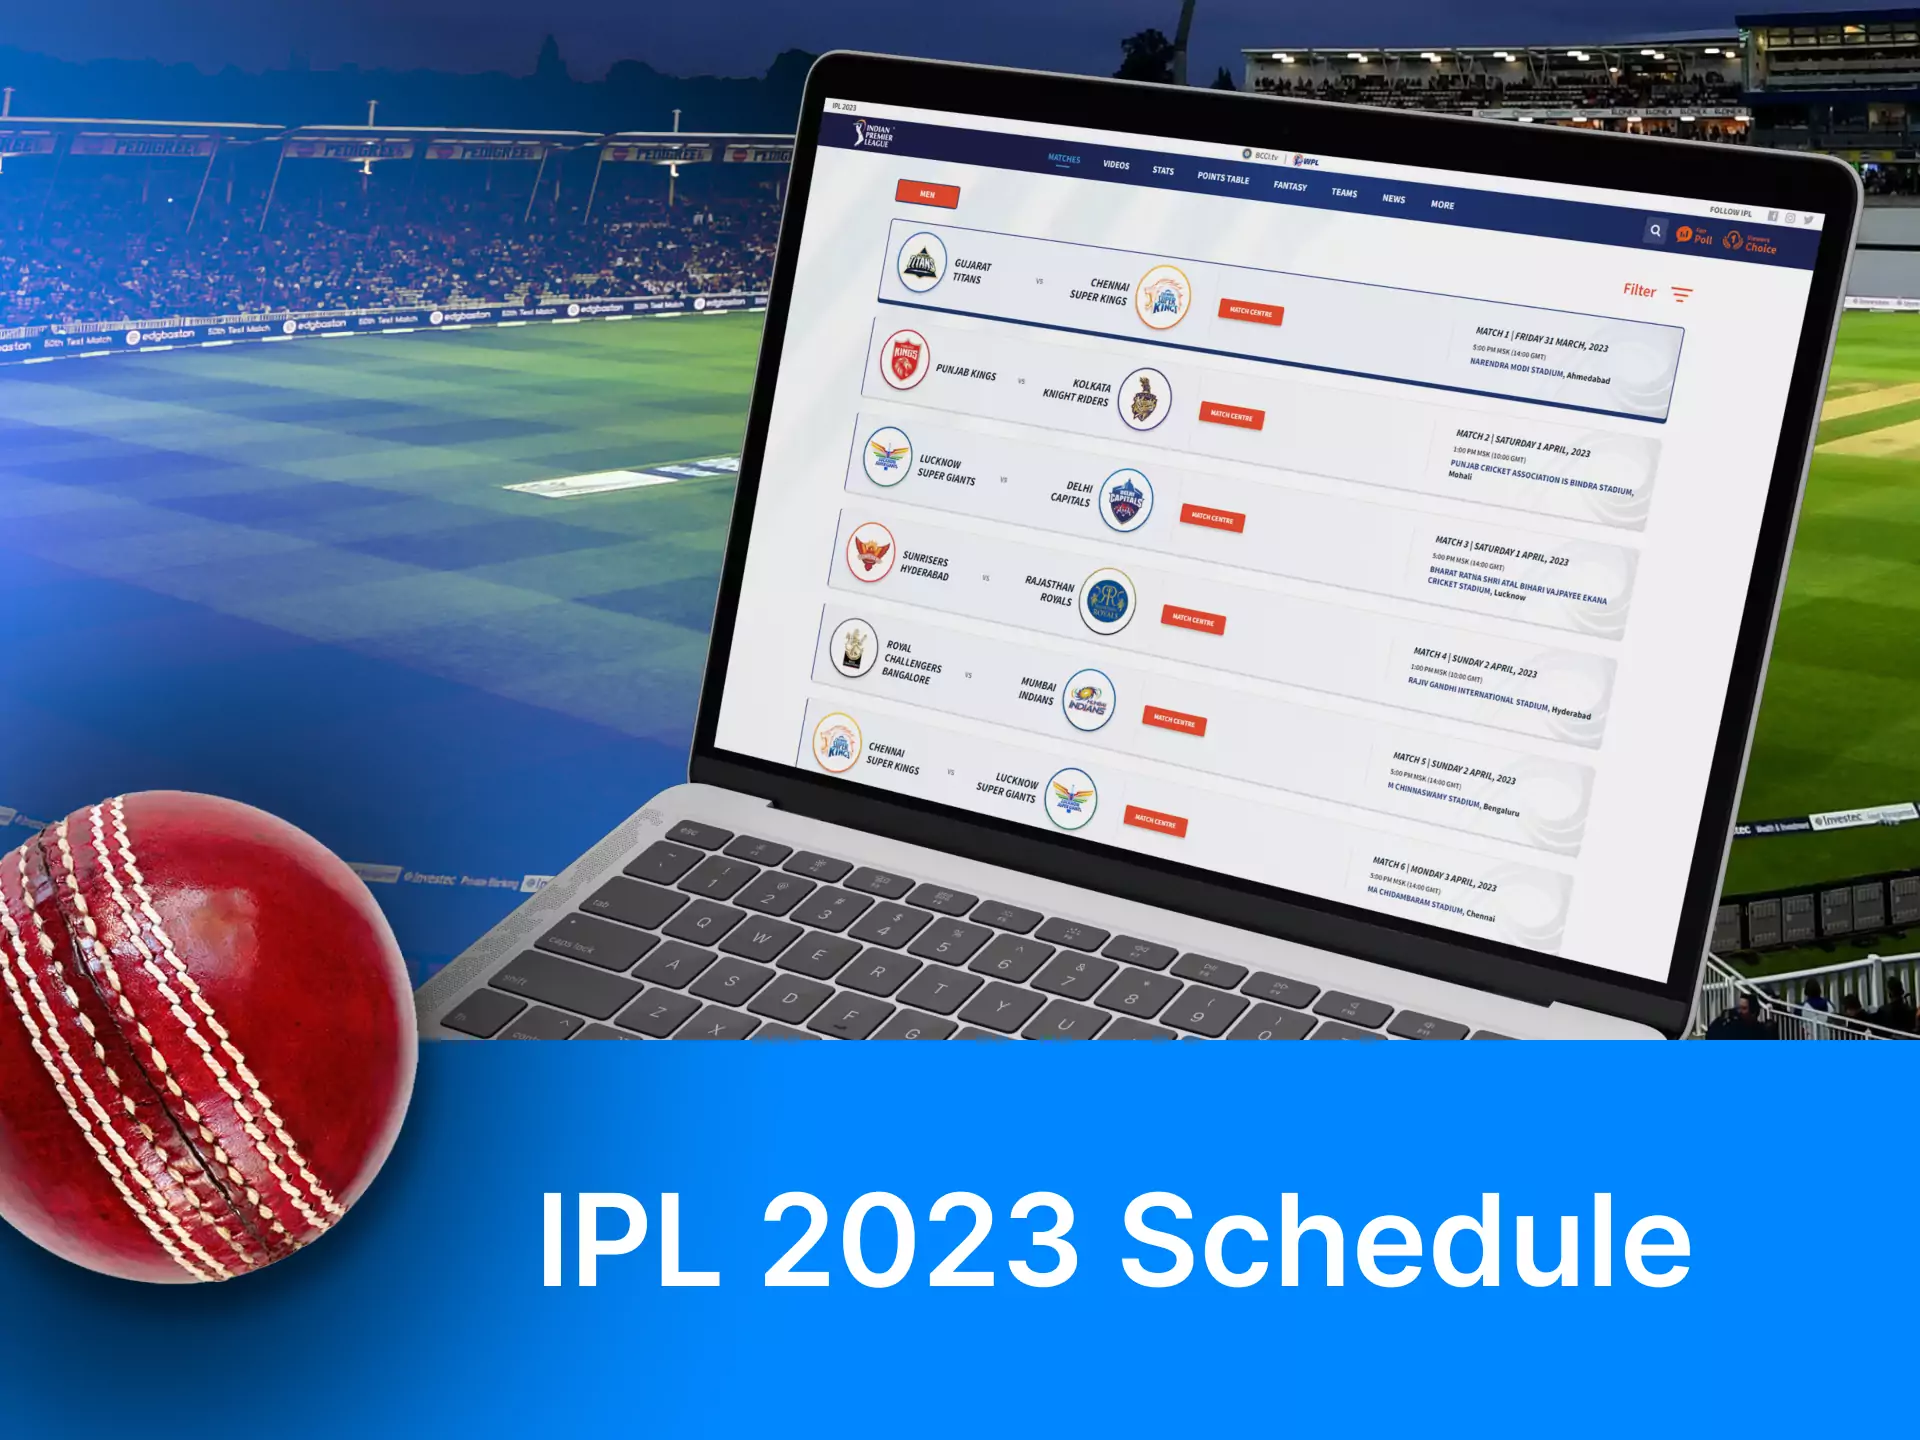 Check out the match schedule for IPL cricket tournaments.